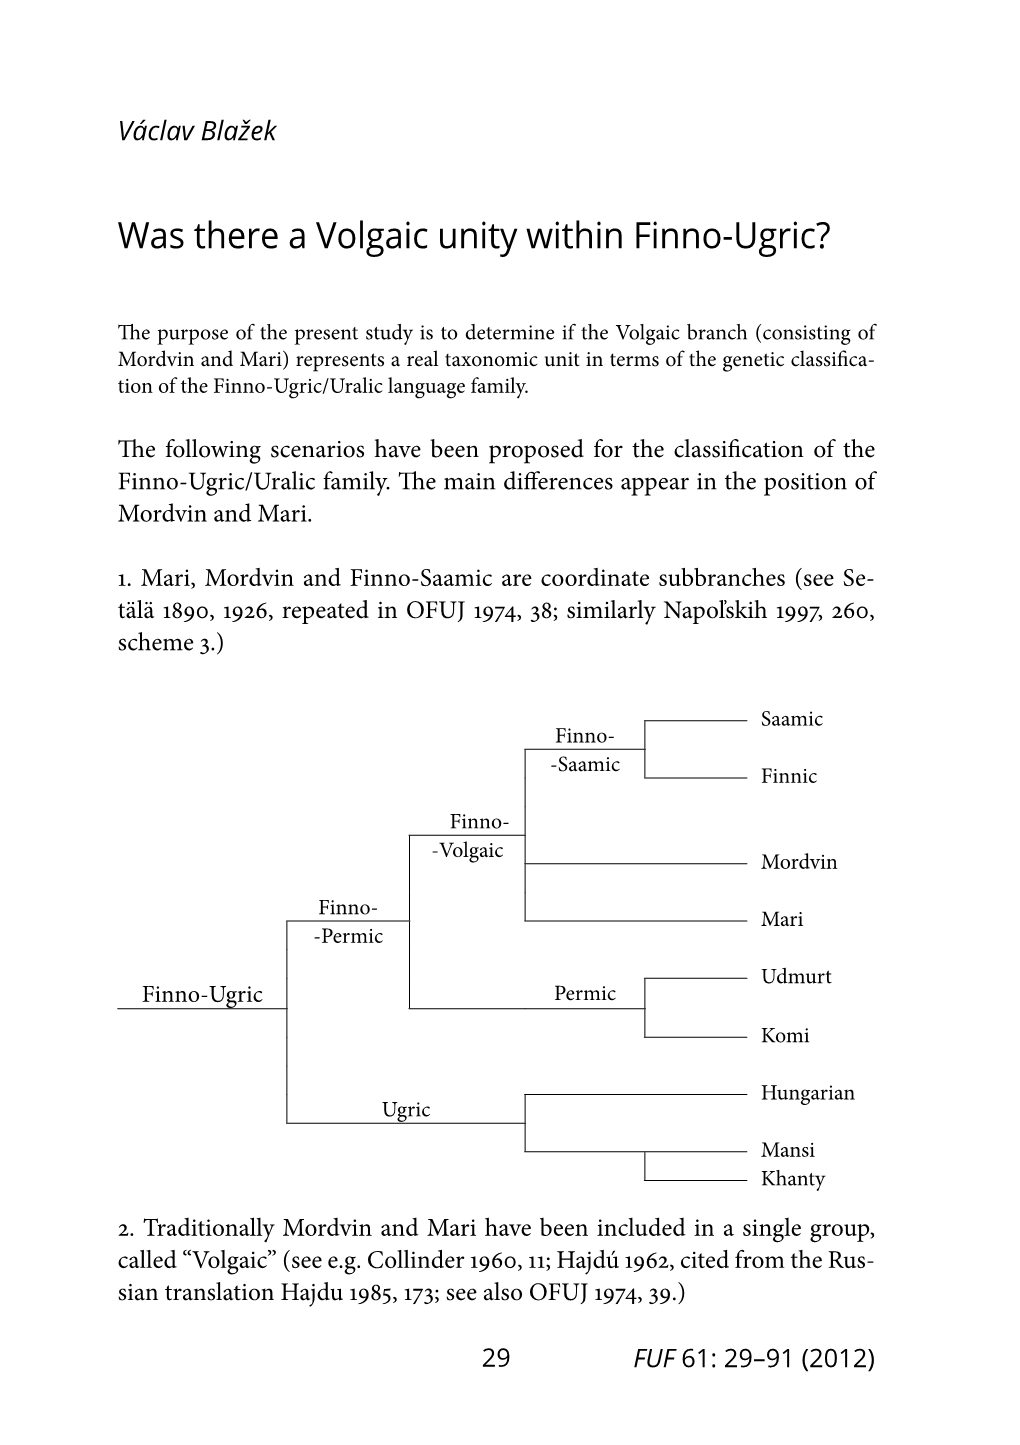 Was There a Volgaic Unity Within Finno-Ugric?